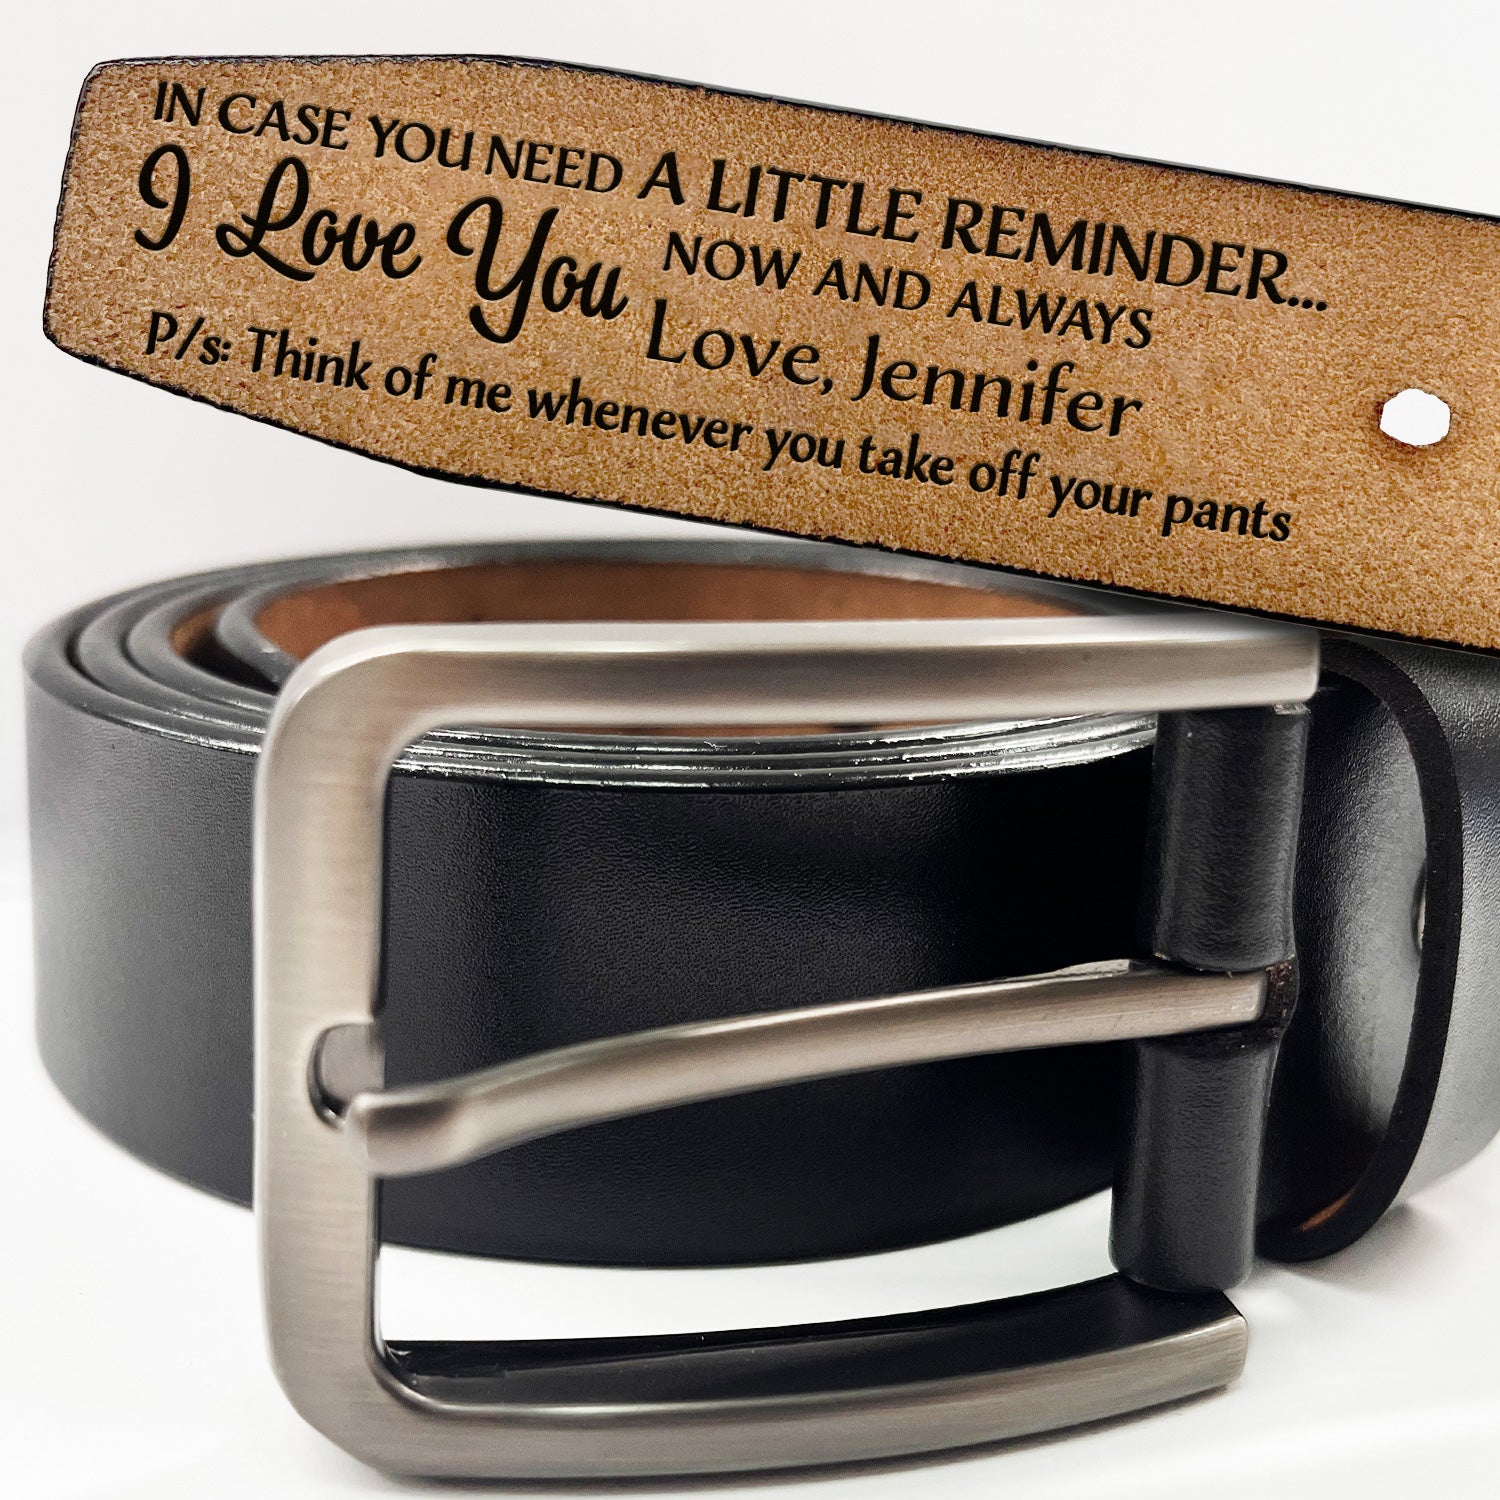 In Case You Need A Little Reminder - Funny Gift For Husband, Boyfriend, Spouse, Fiance, Dad Gift - Personalized Engraved Leather Belt